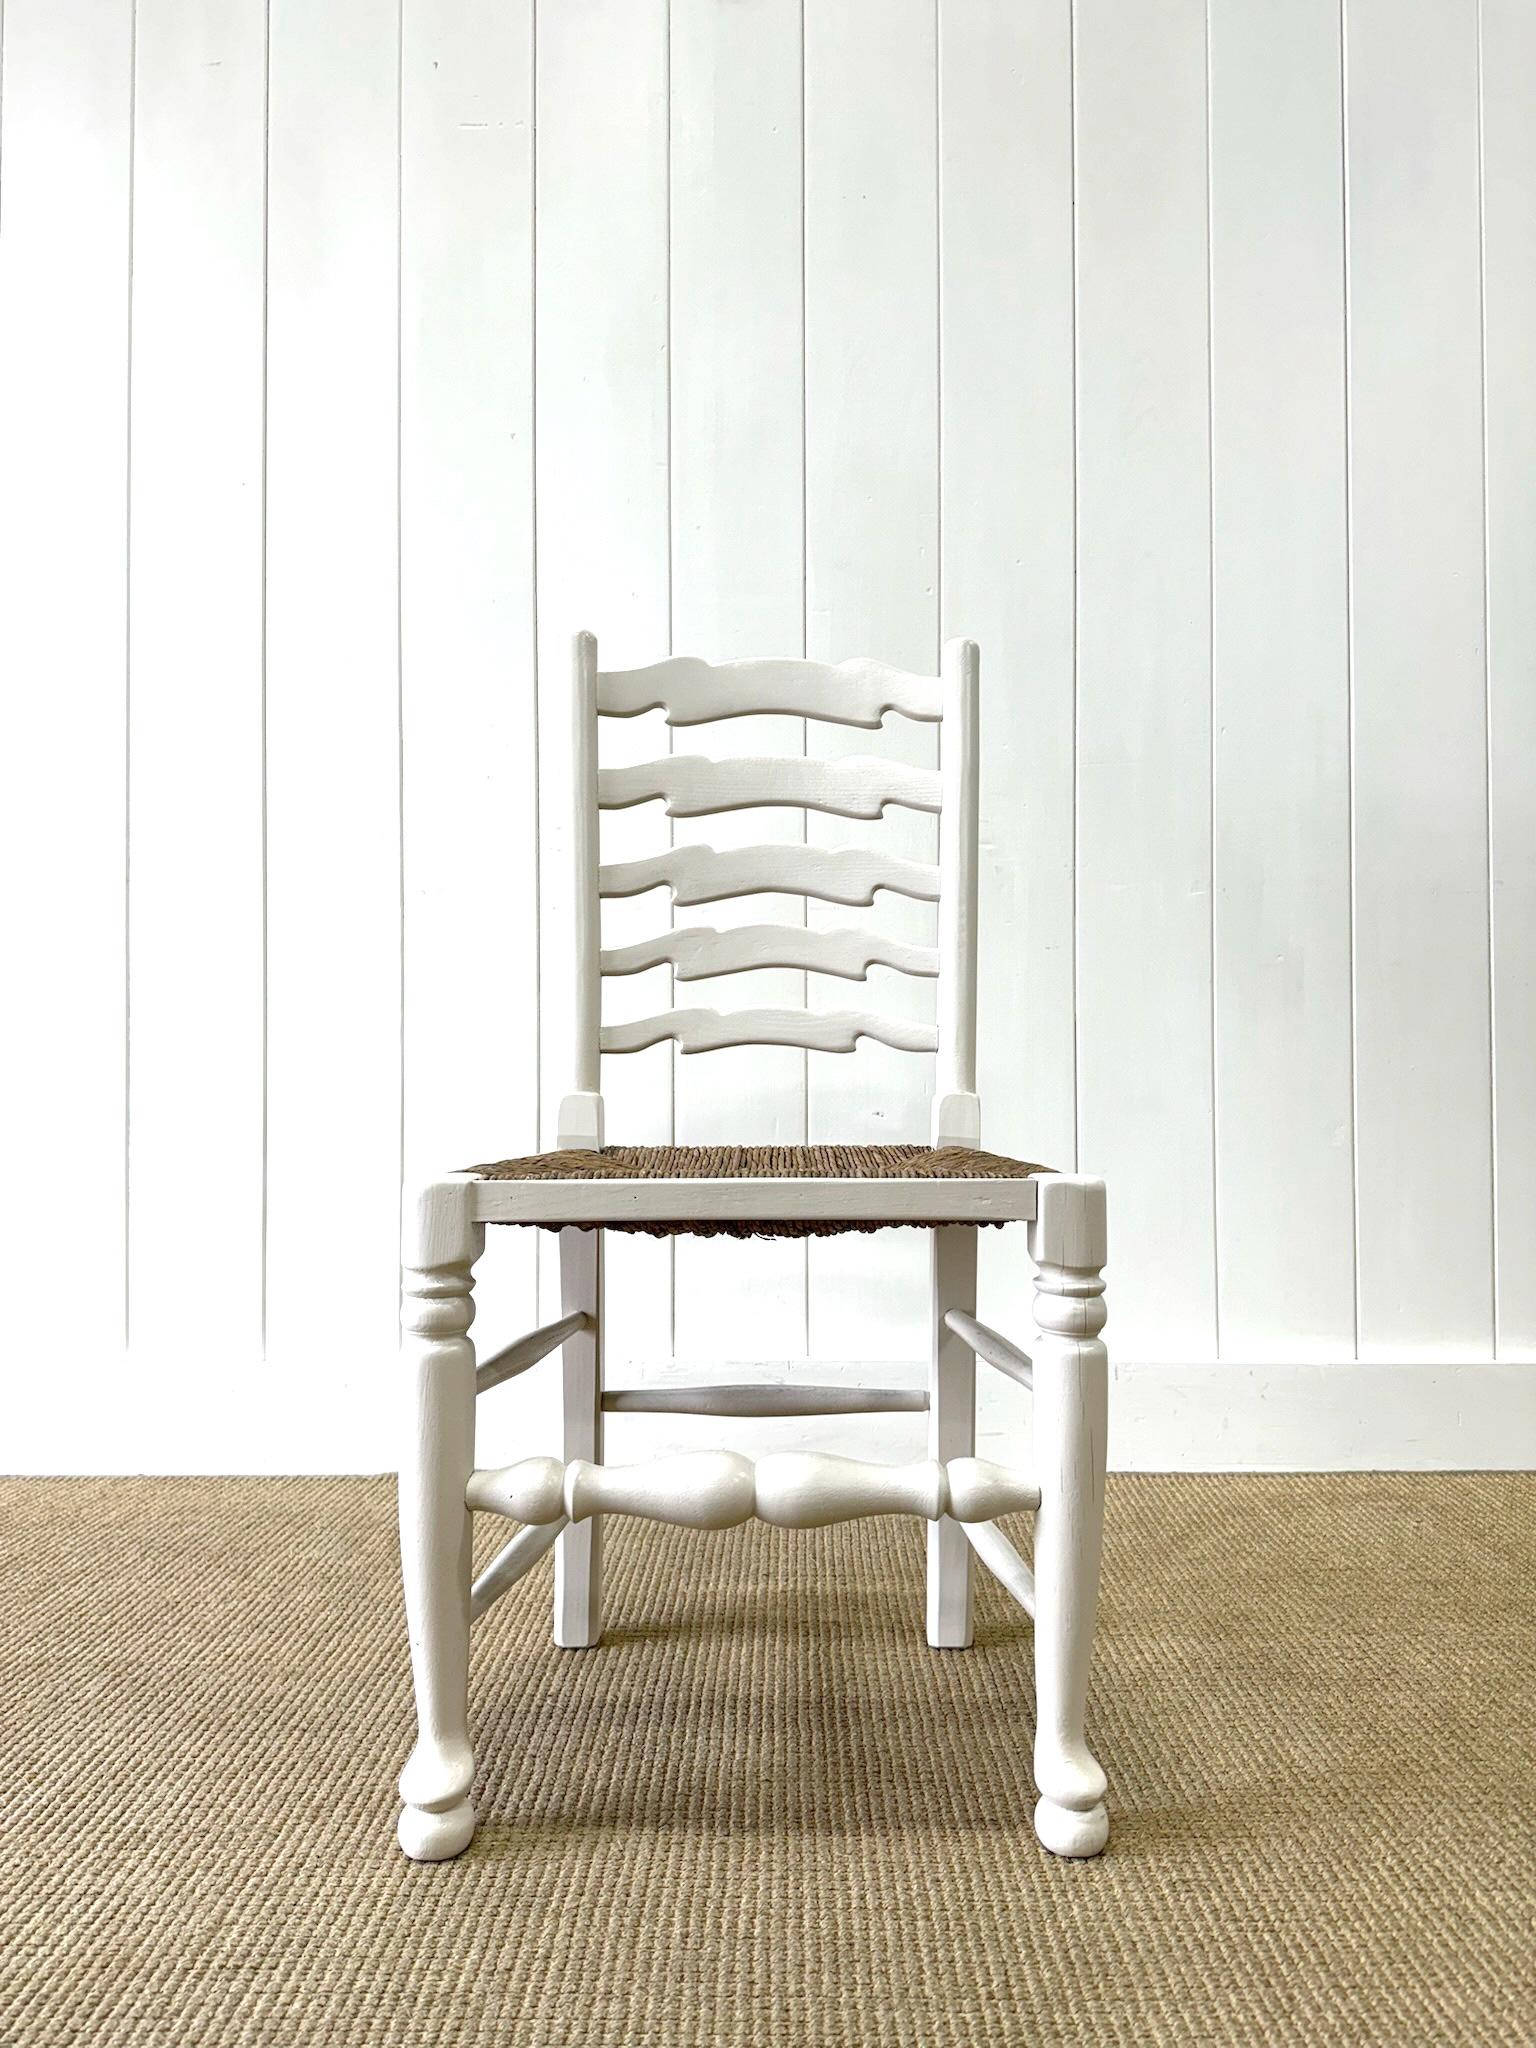 A Set of 4 Ladderback Rush Seat Chairs Painted White In Good Condition For Sale In Oak Park, MI